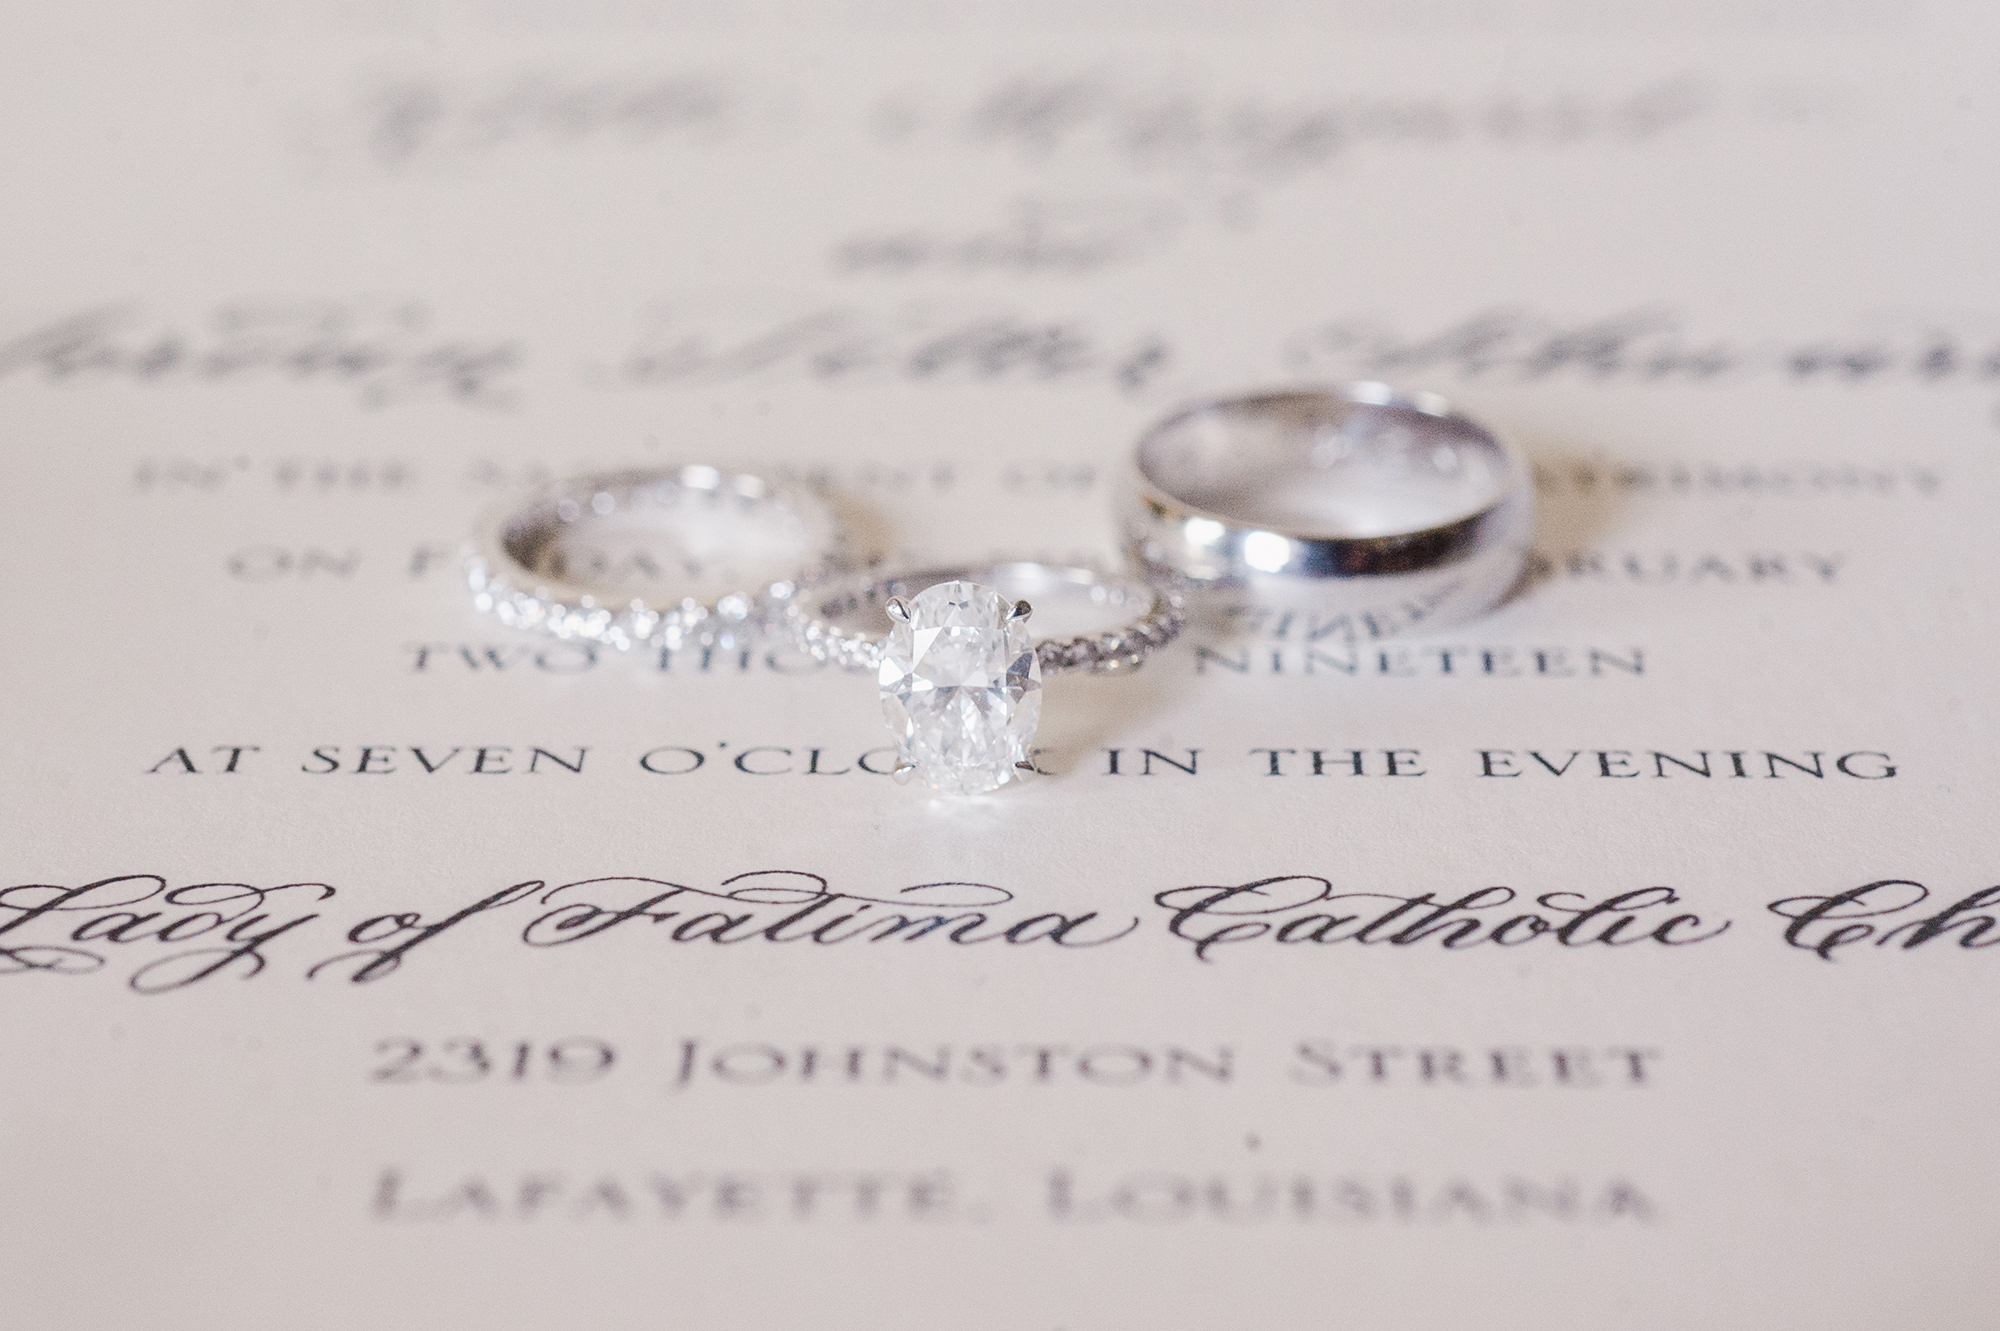 wedding and engagement rings on invitation